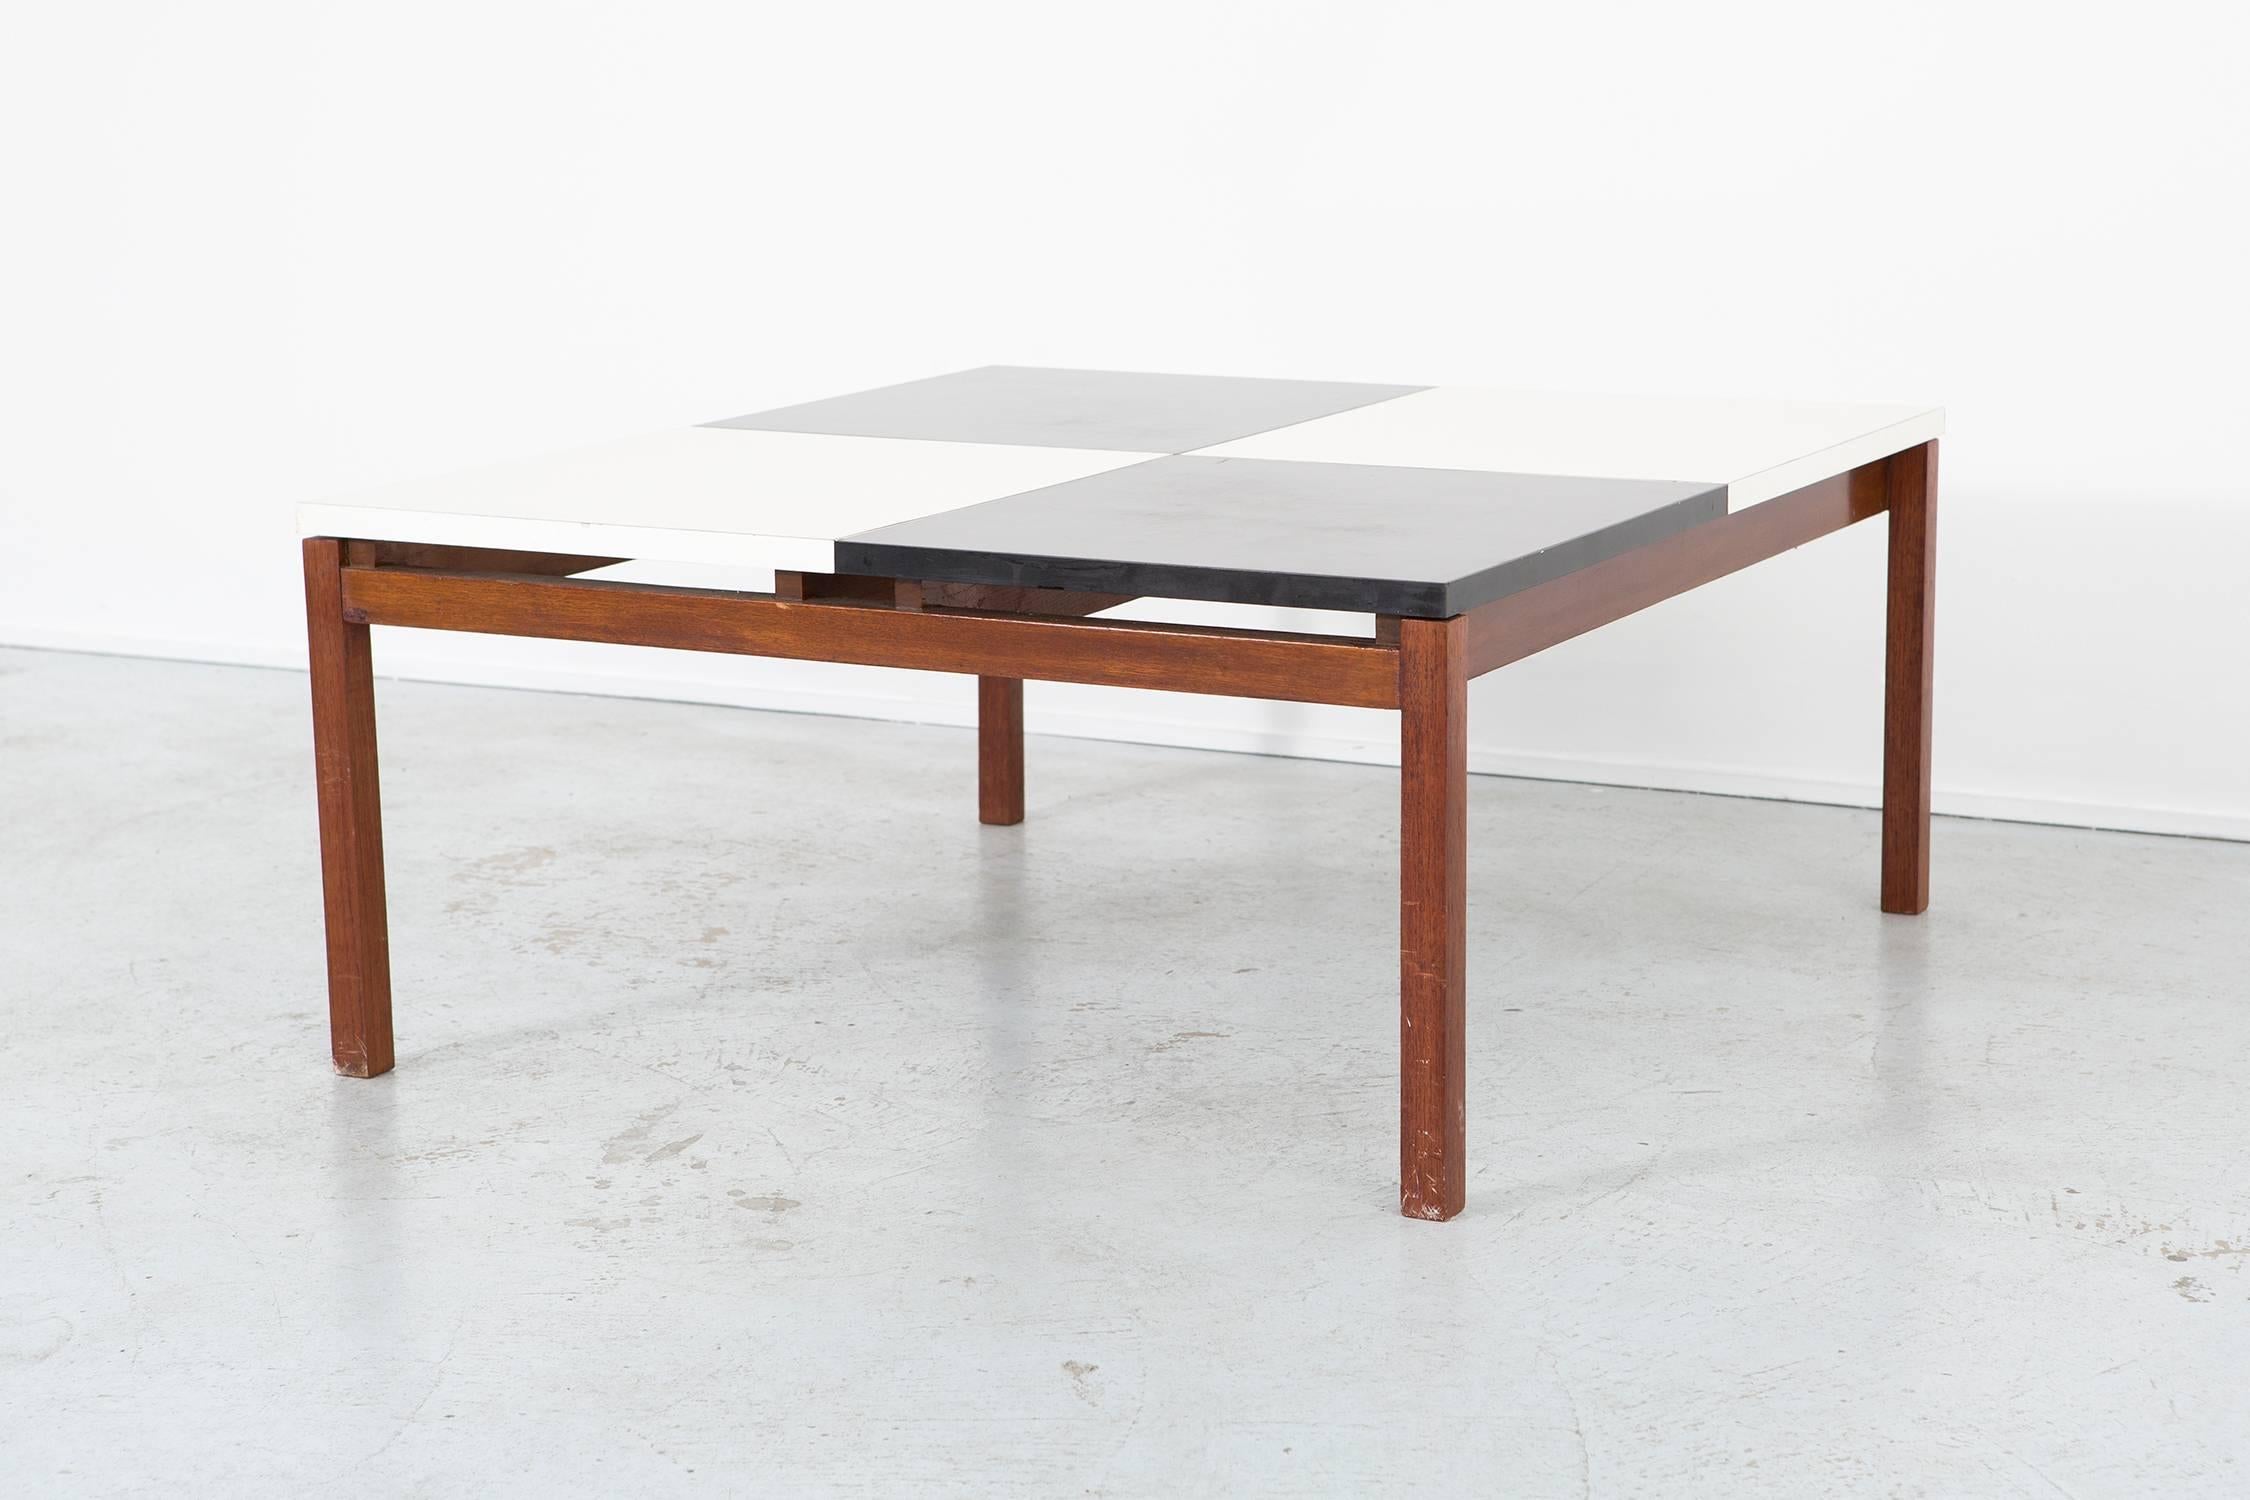 Coffee table

Designed by Lewis Butler for Knoll

USA, circa1960s

Walnut and laminate top

Measures: 15” H x 38 ¼” W x 34” D.